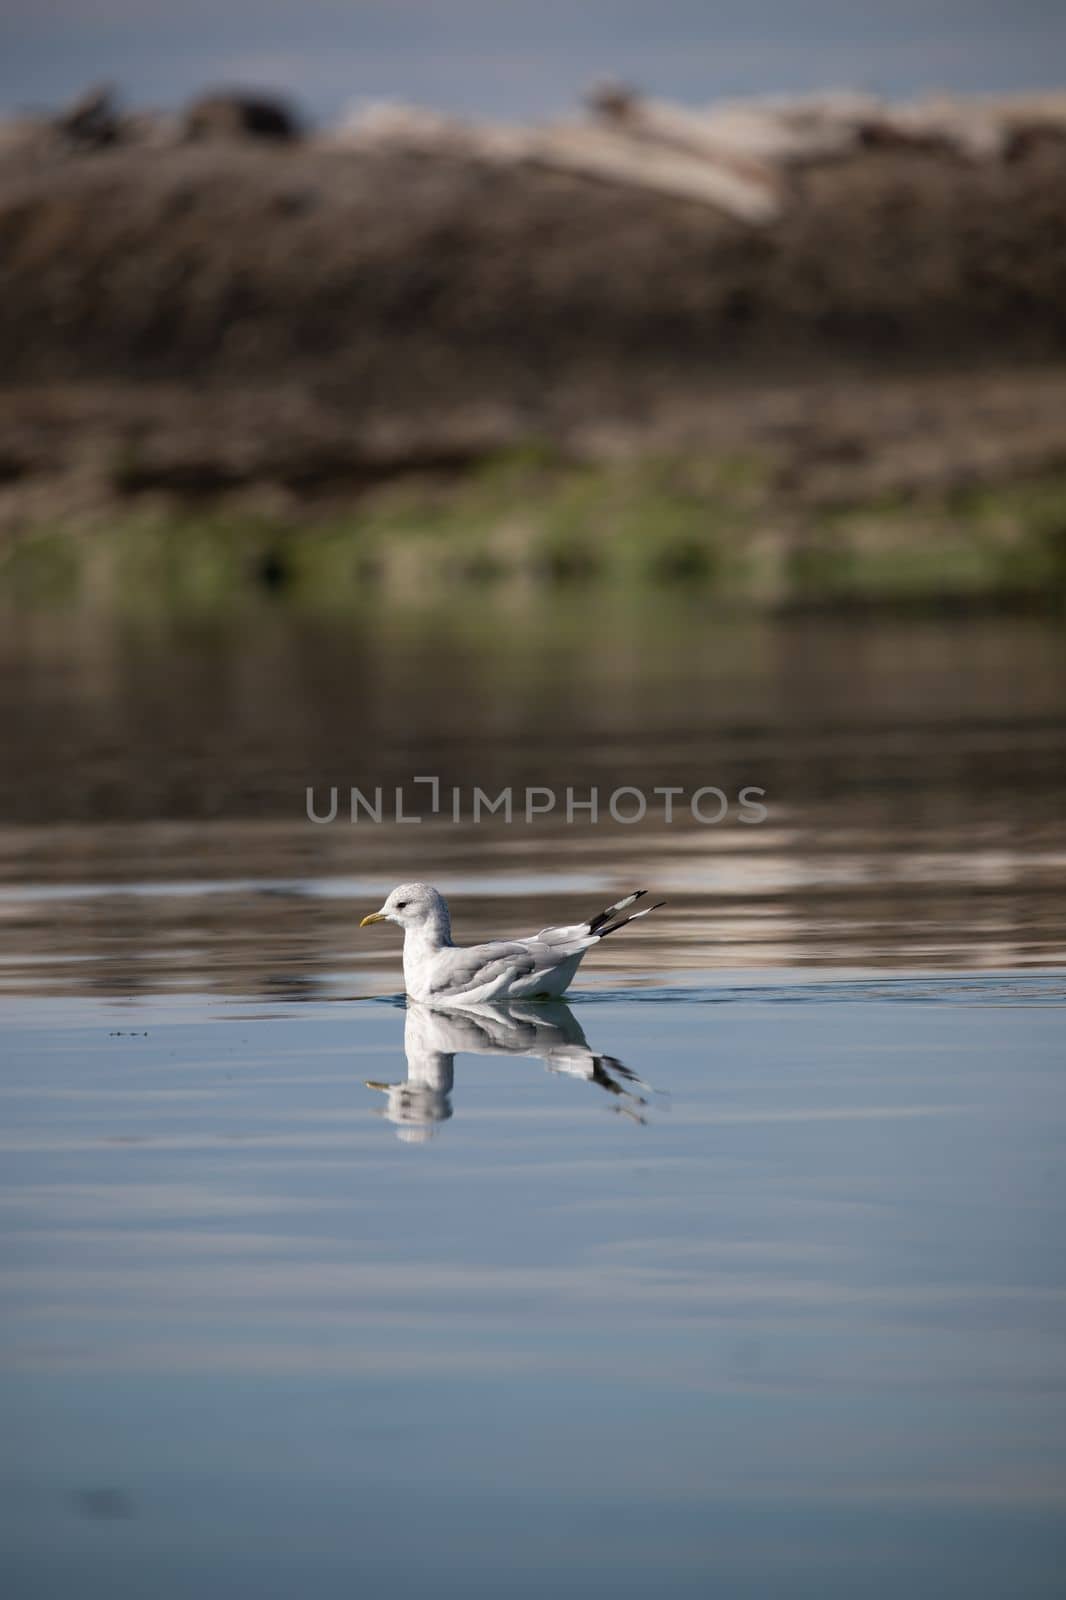 A short-billed gull formerly known as mew gull swimming in water with its reflection near a rocky shore by Granchinho